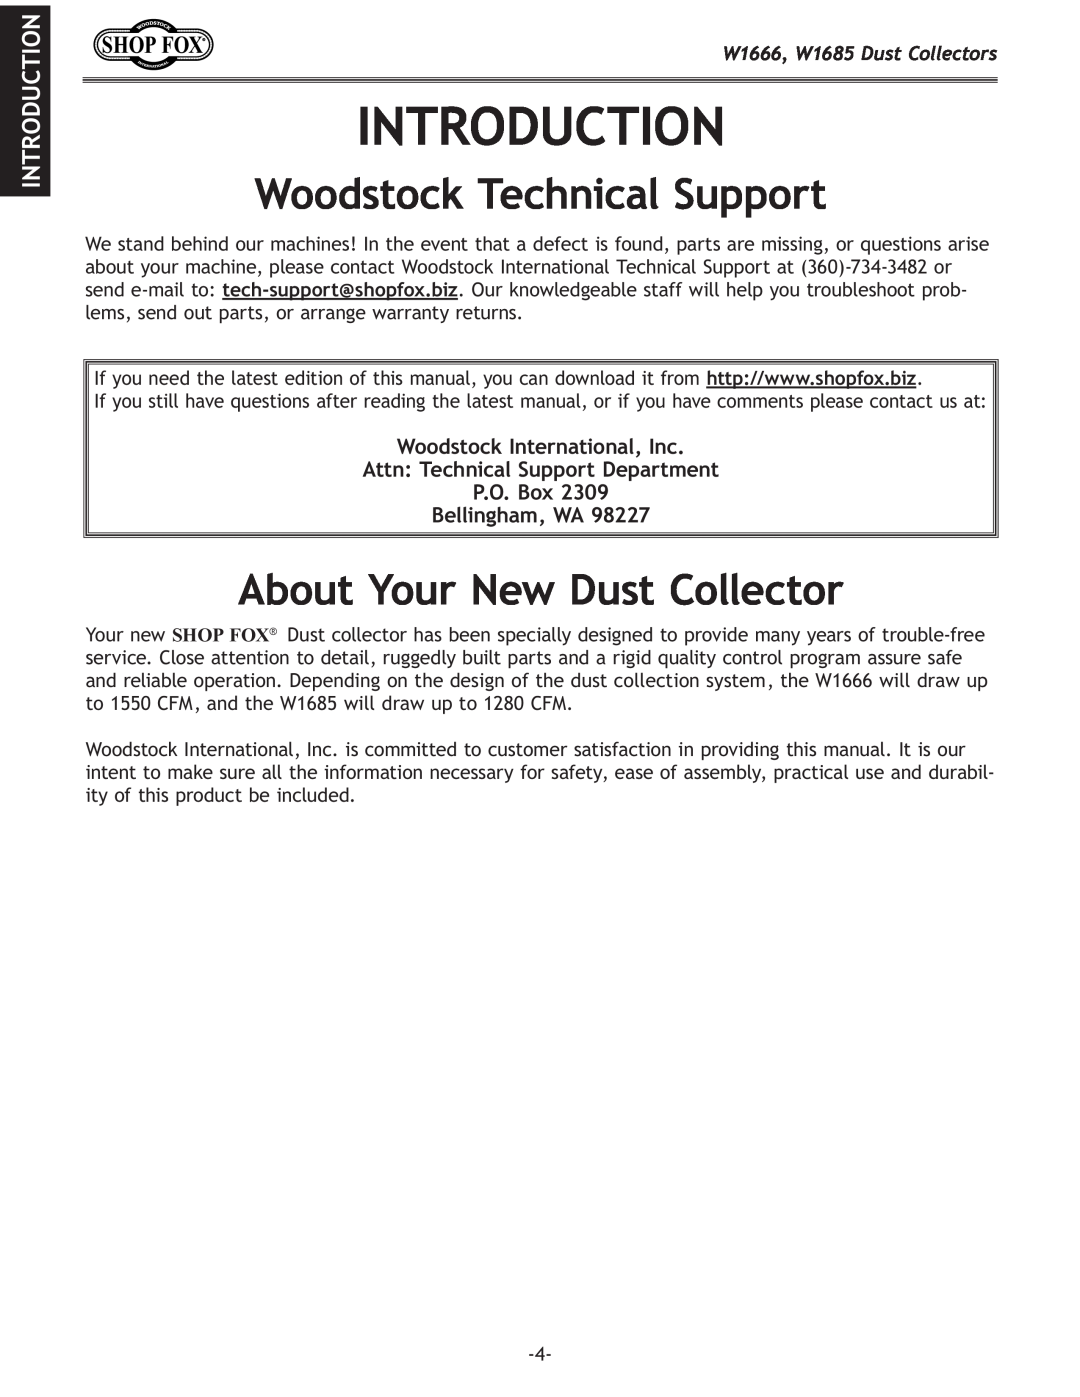 Woodstock W1685, W1666 Introduction, Woodstock Technical Support, About Your New Dust Collector, P.O. Box Bellingham, WA 